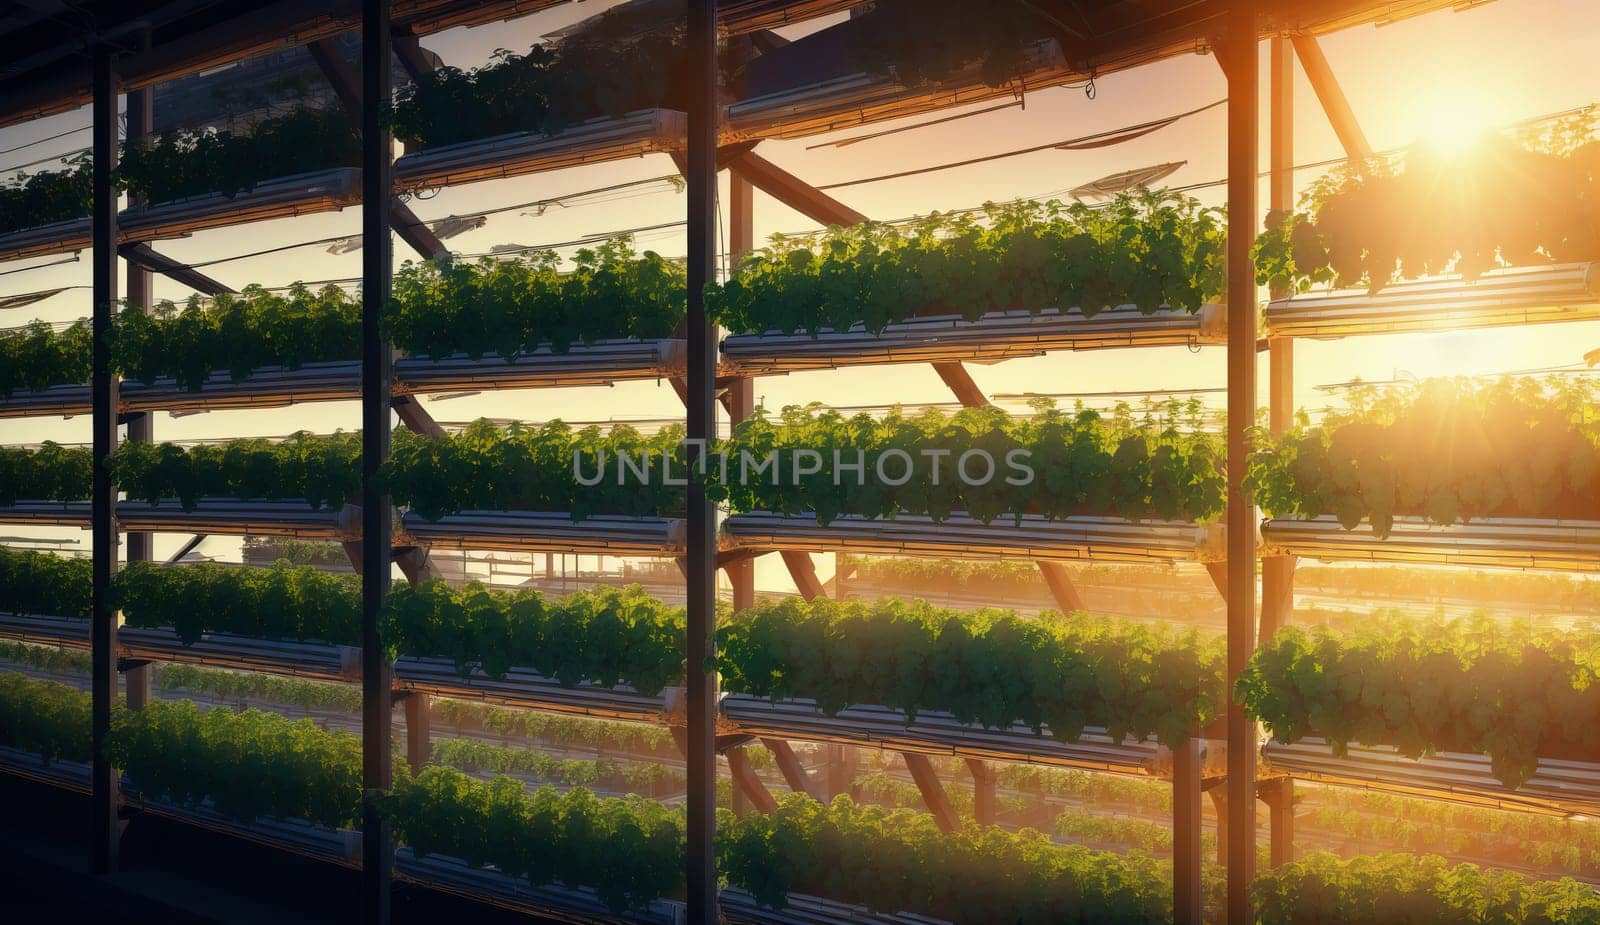 Greenhouse filled with plants illuminated by the suns light through windows by DCStudio